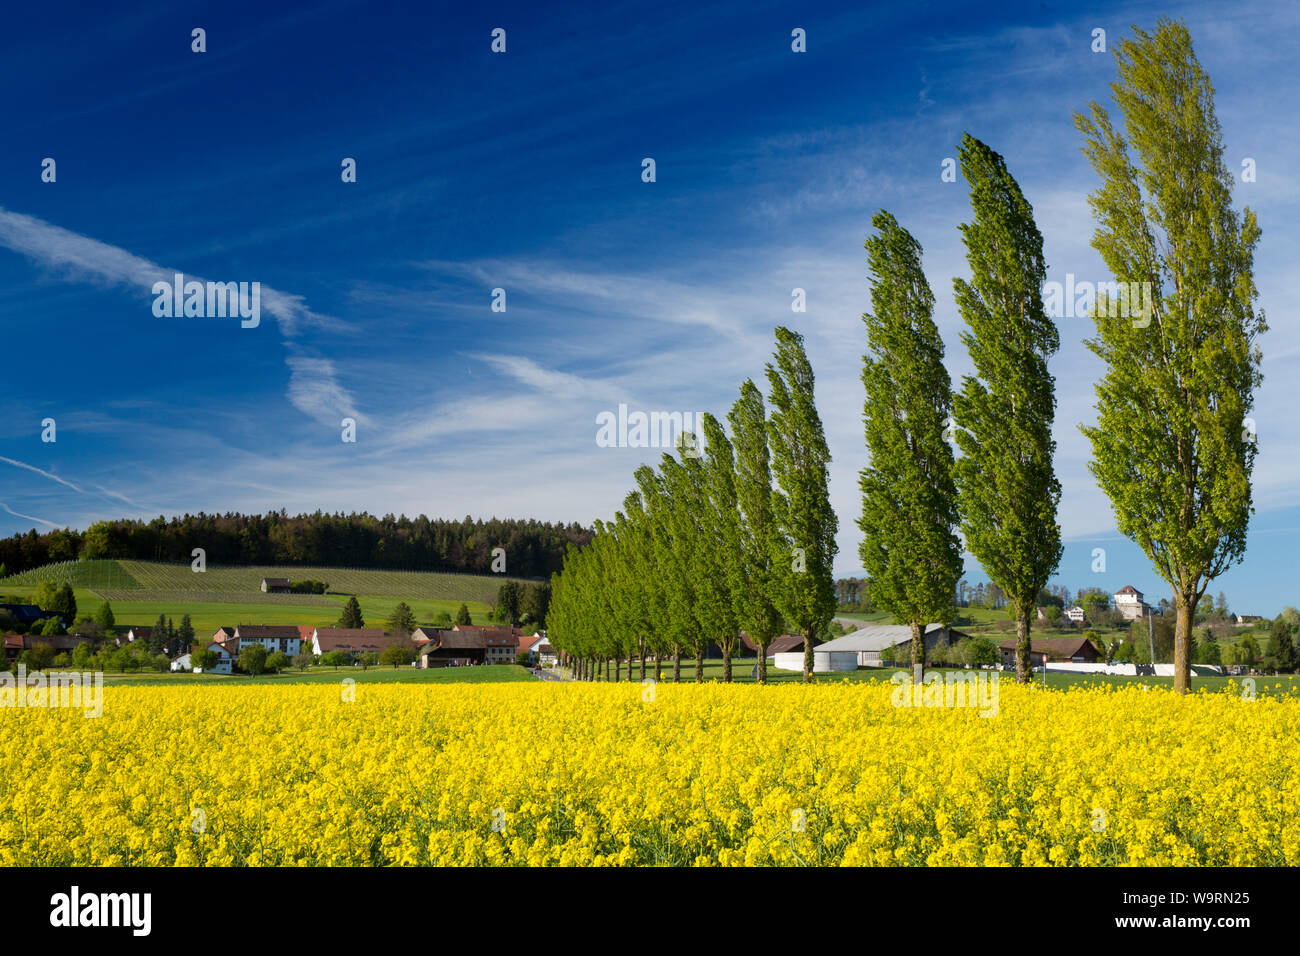 Pappelallee bei Stadel ZH *** Local Caption *** Stockfoto